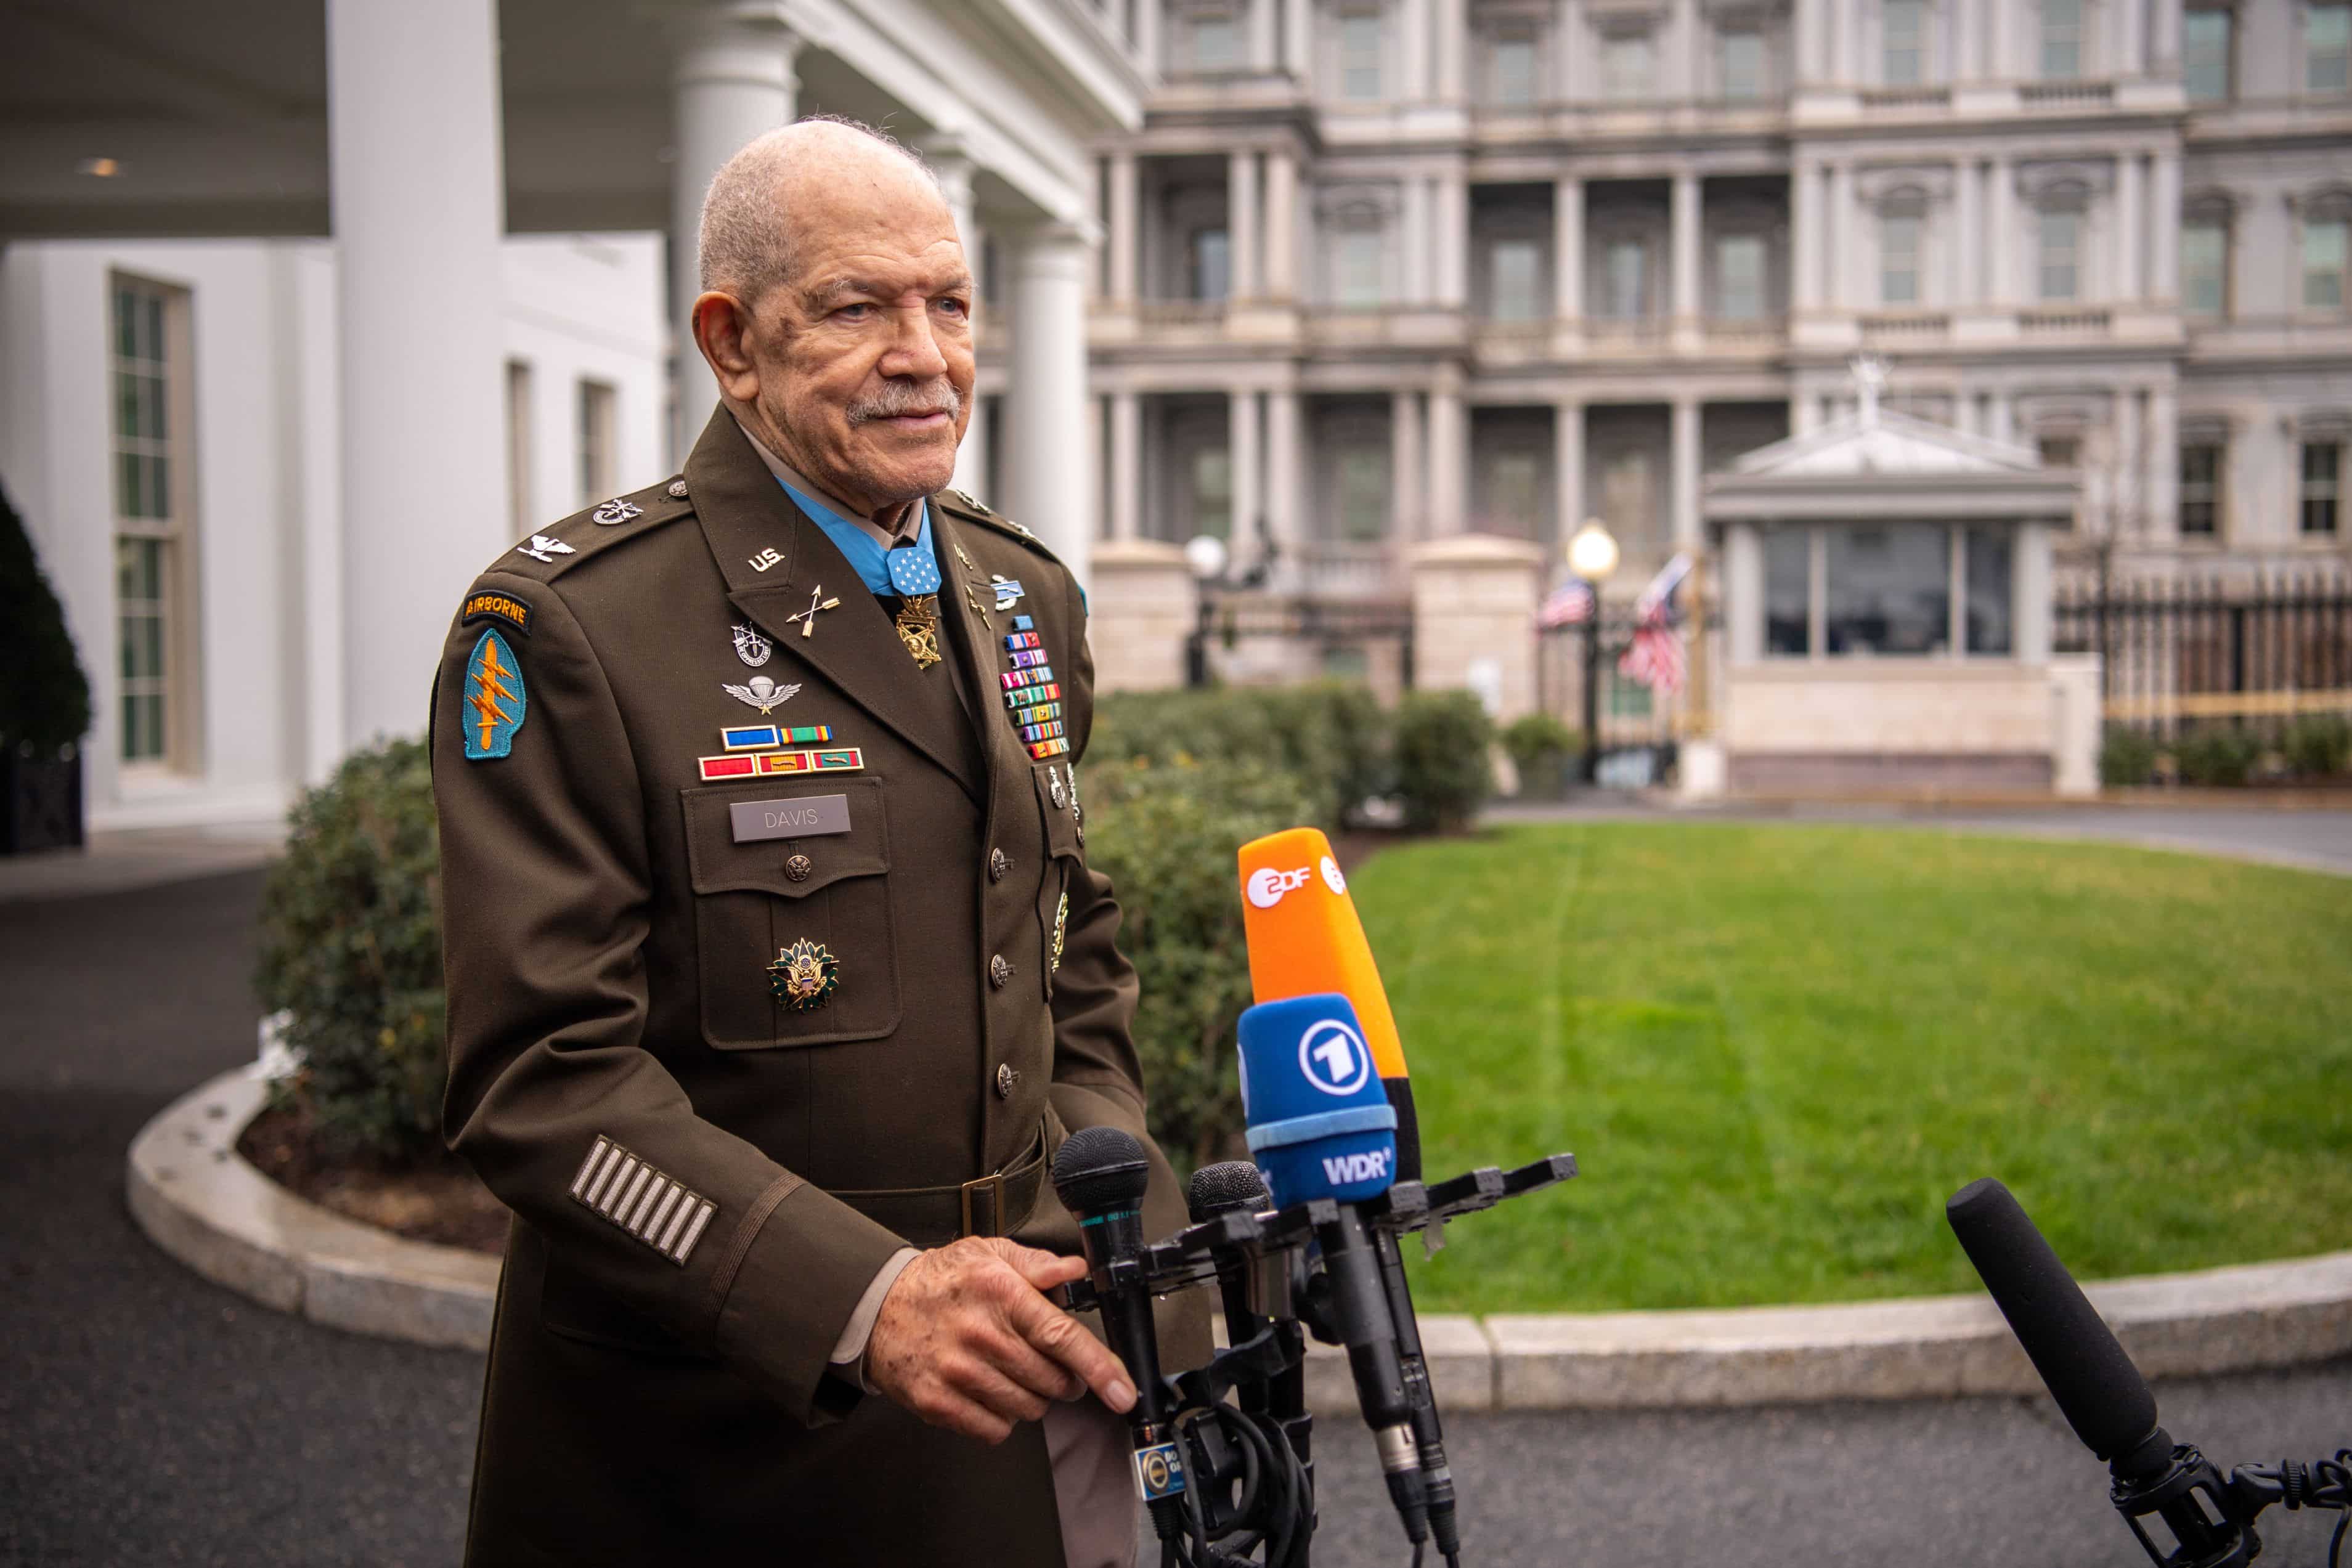 Retired U.S. Army Col. Paris D. Davis addresses the media just after receiving the Medal of Honor at the White House, March 3, 2023.